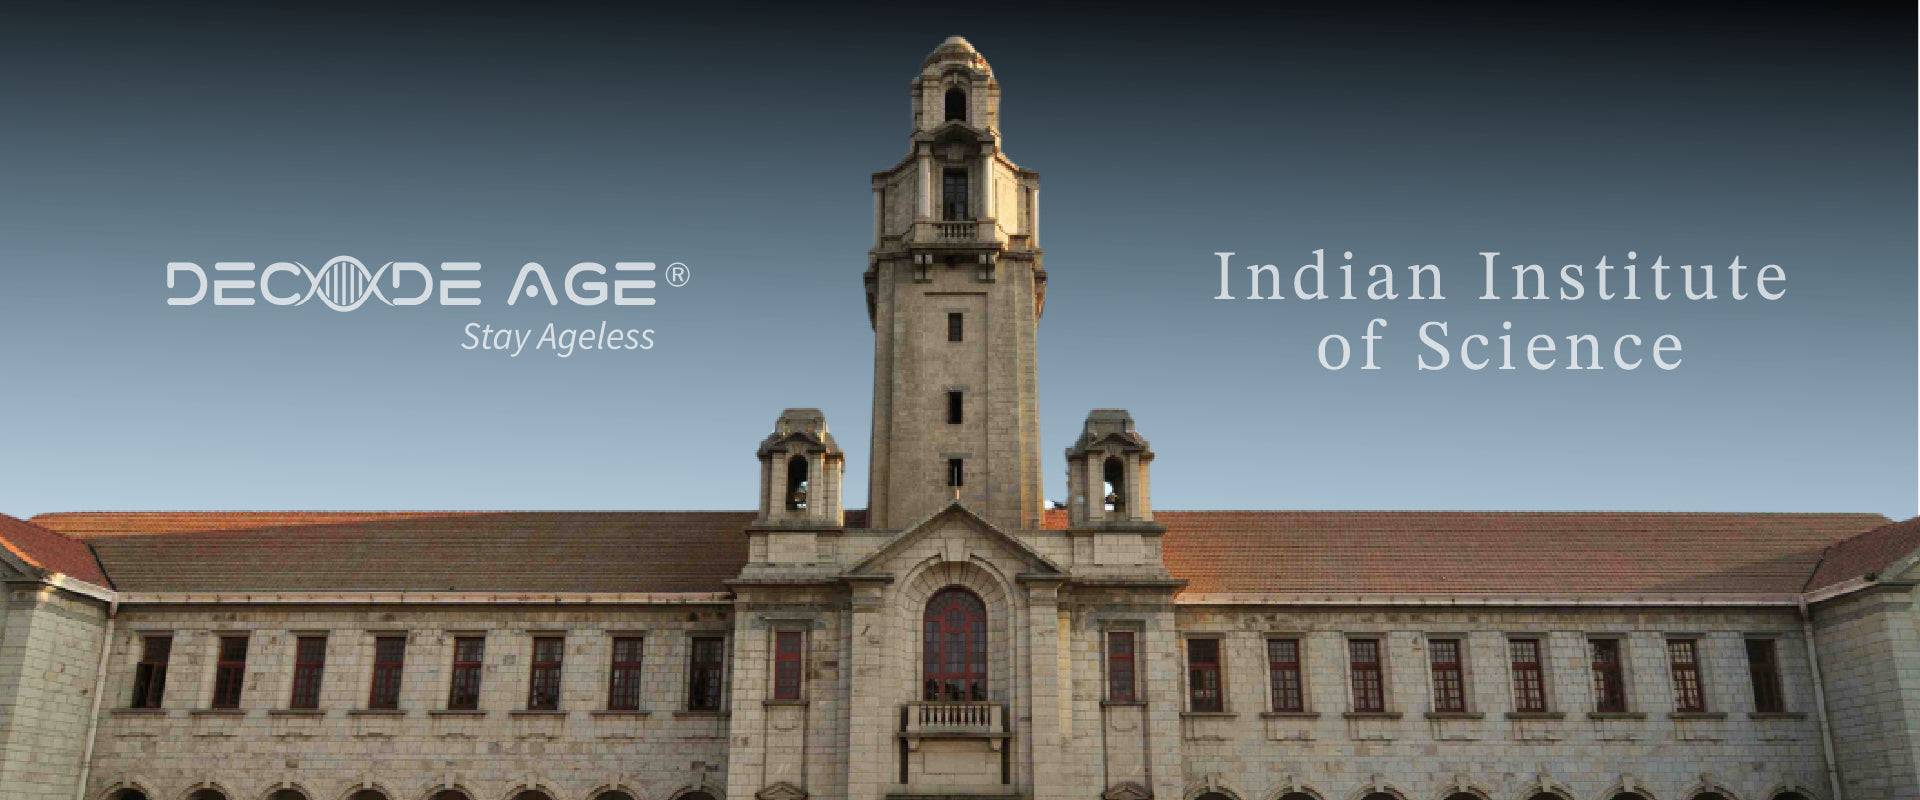 IISc collaborates with Decode Age to Solve Ageing for India 